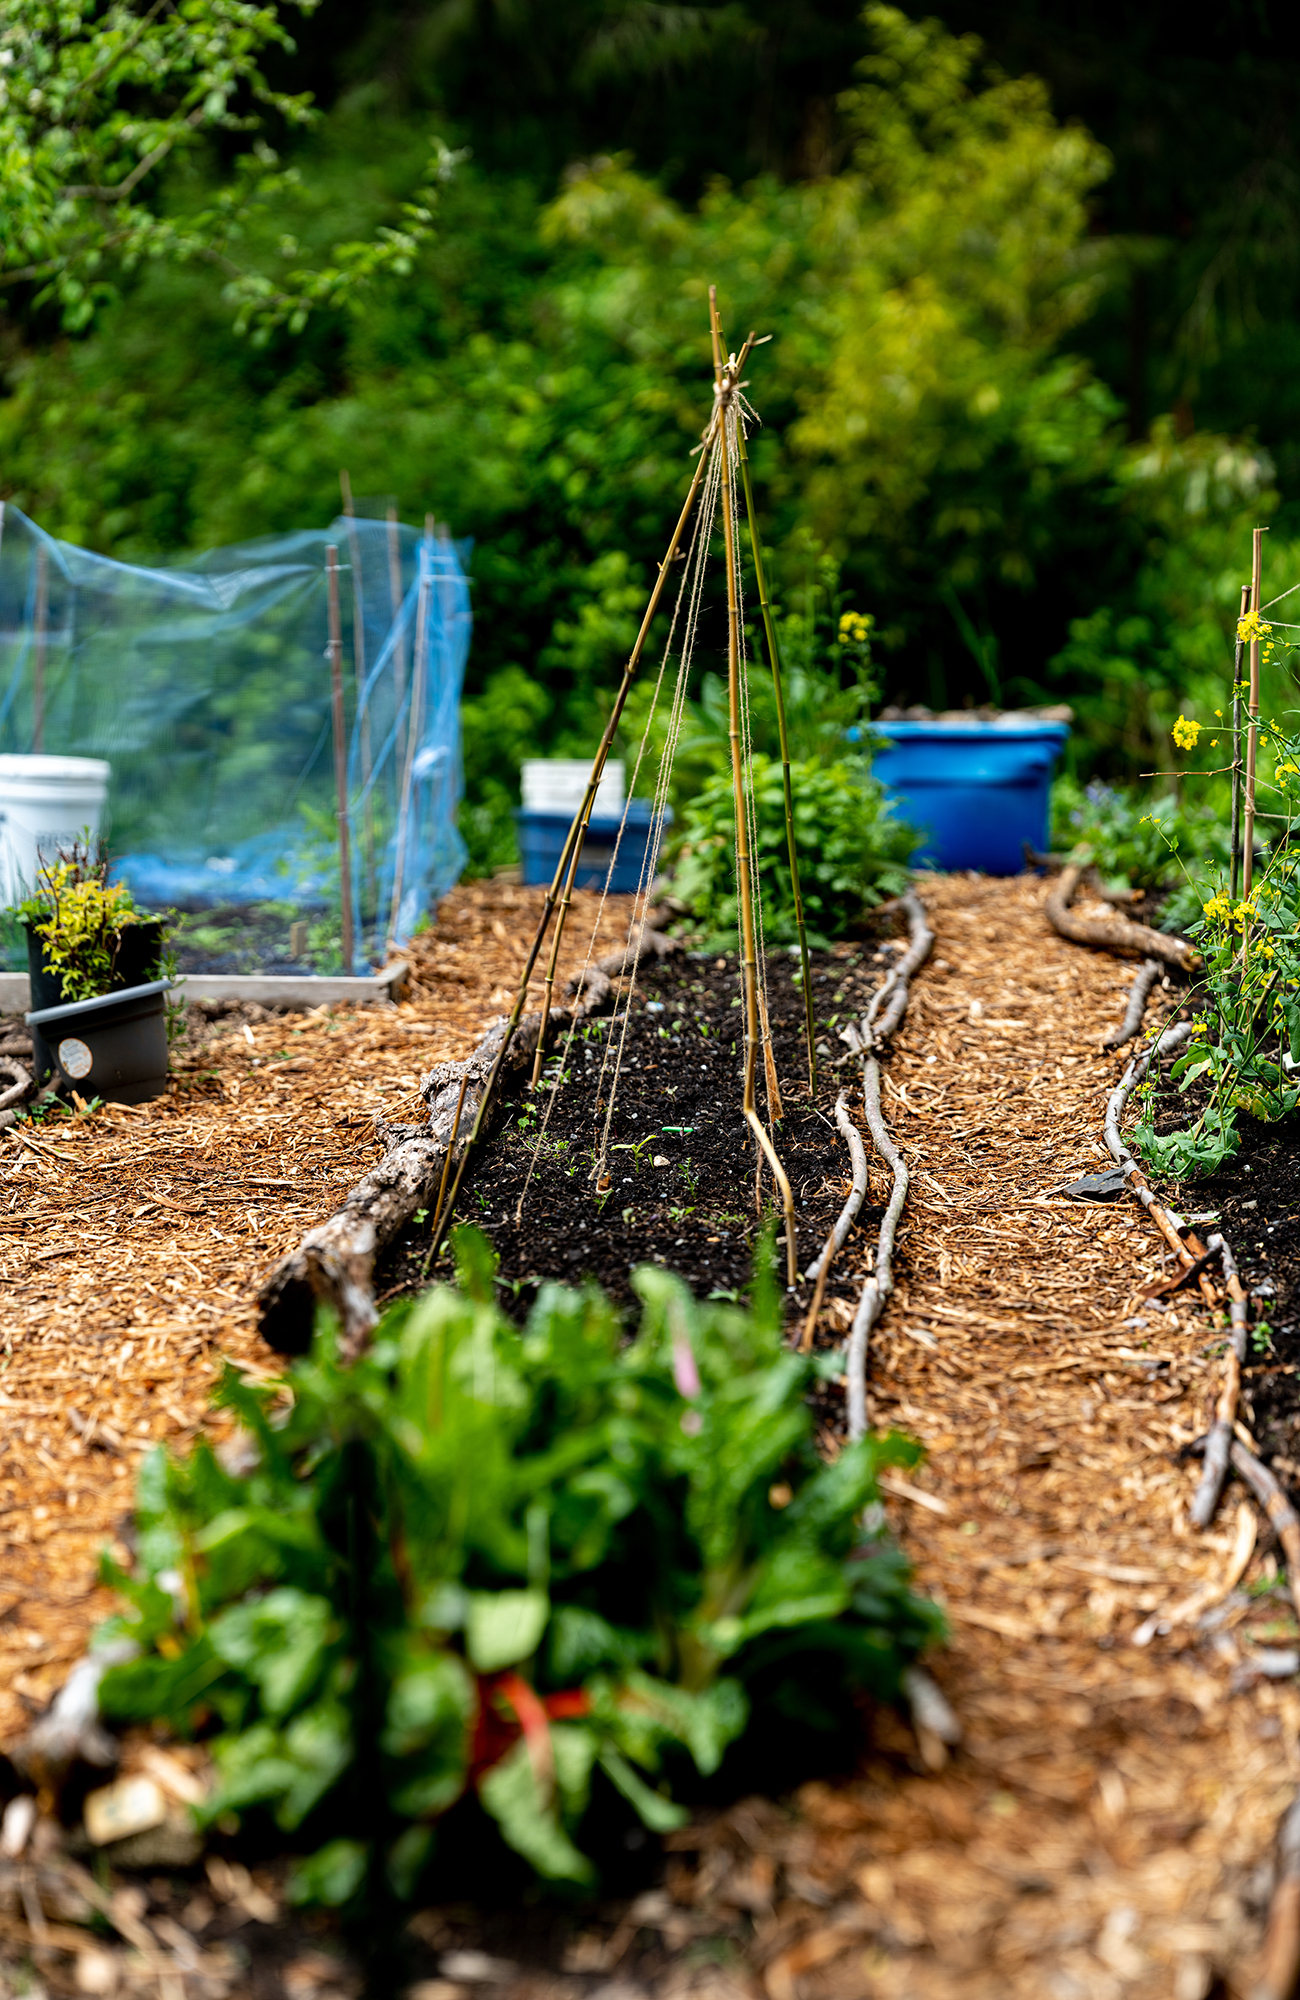 leafy greens grow in garden beds formed in rows lined by sticks and between rows of wood chips